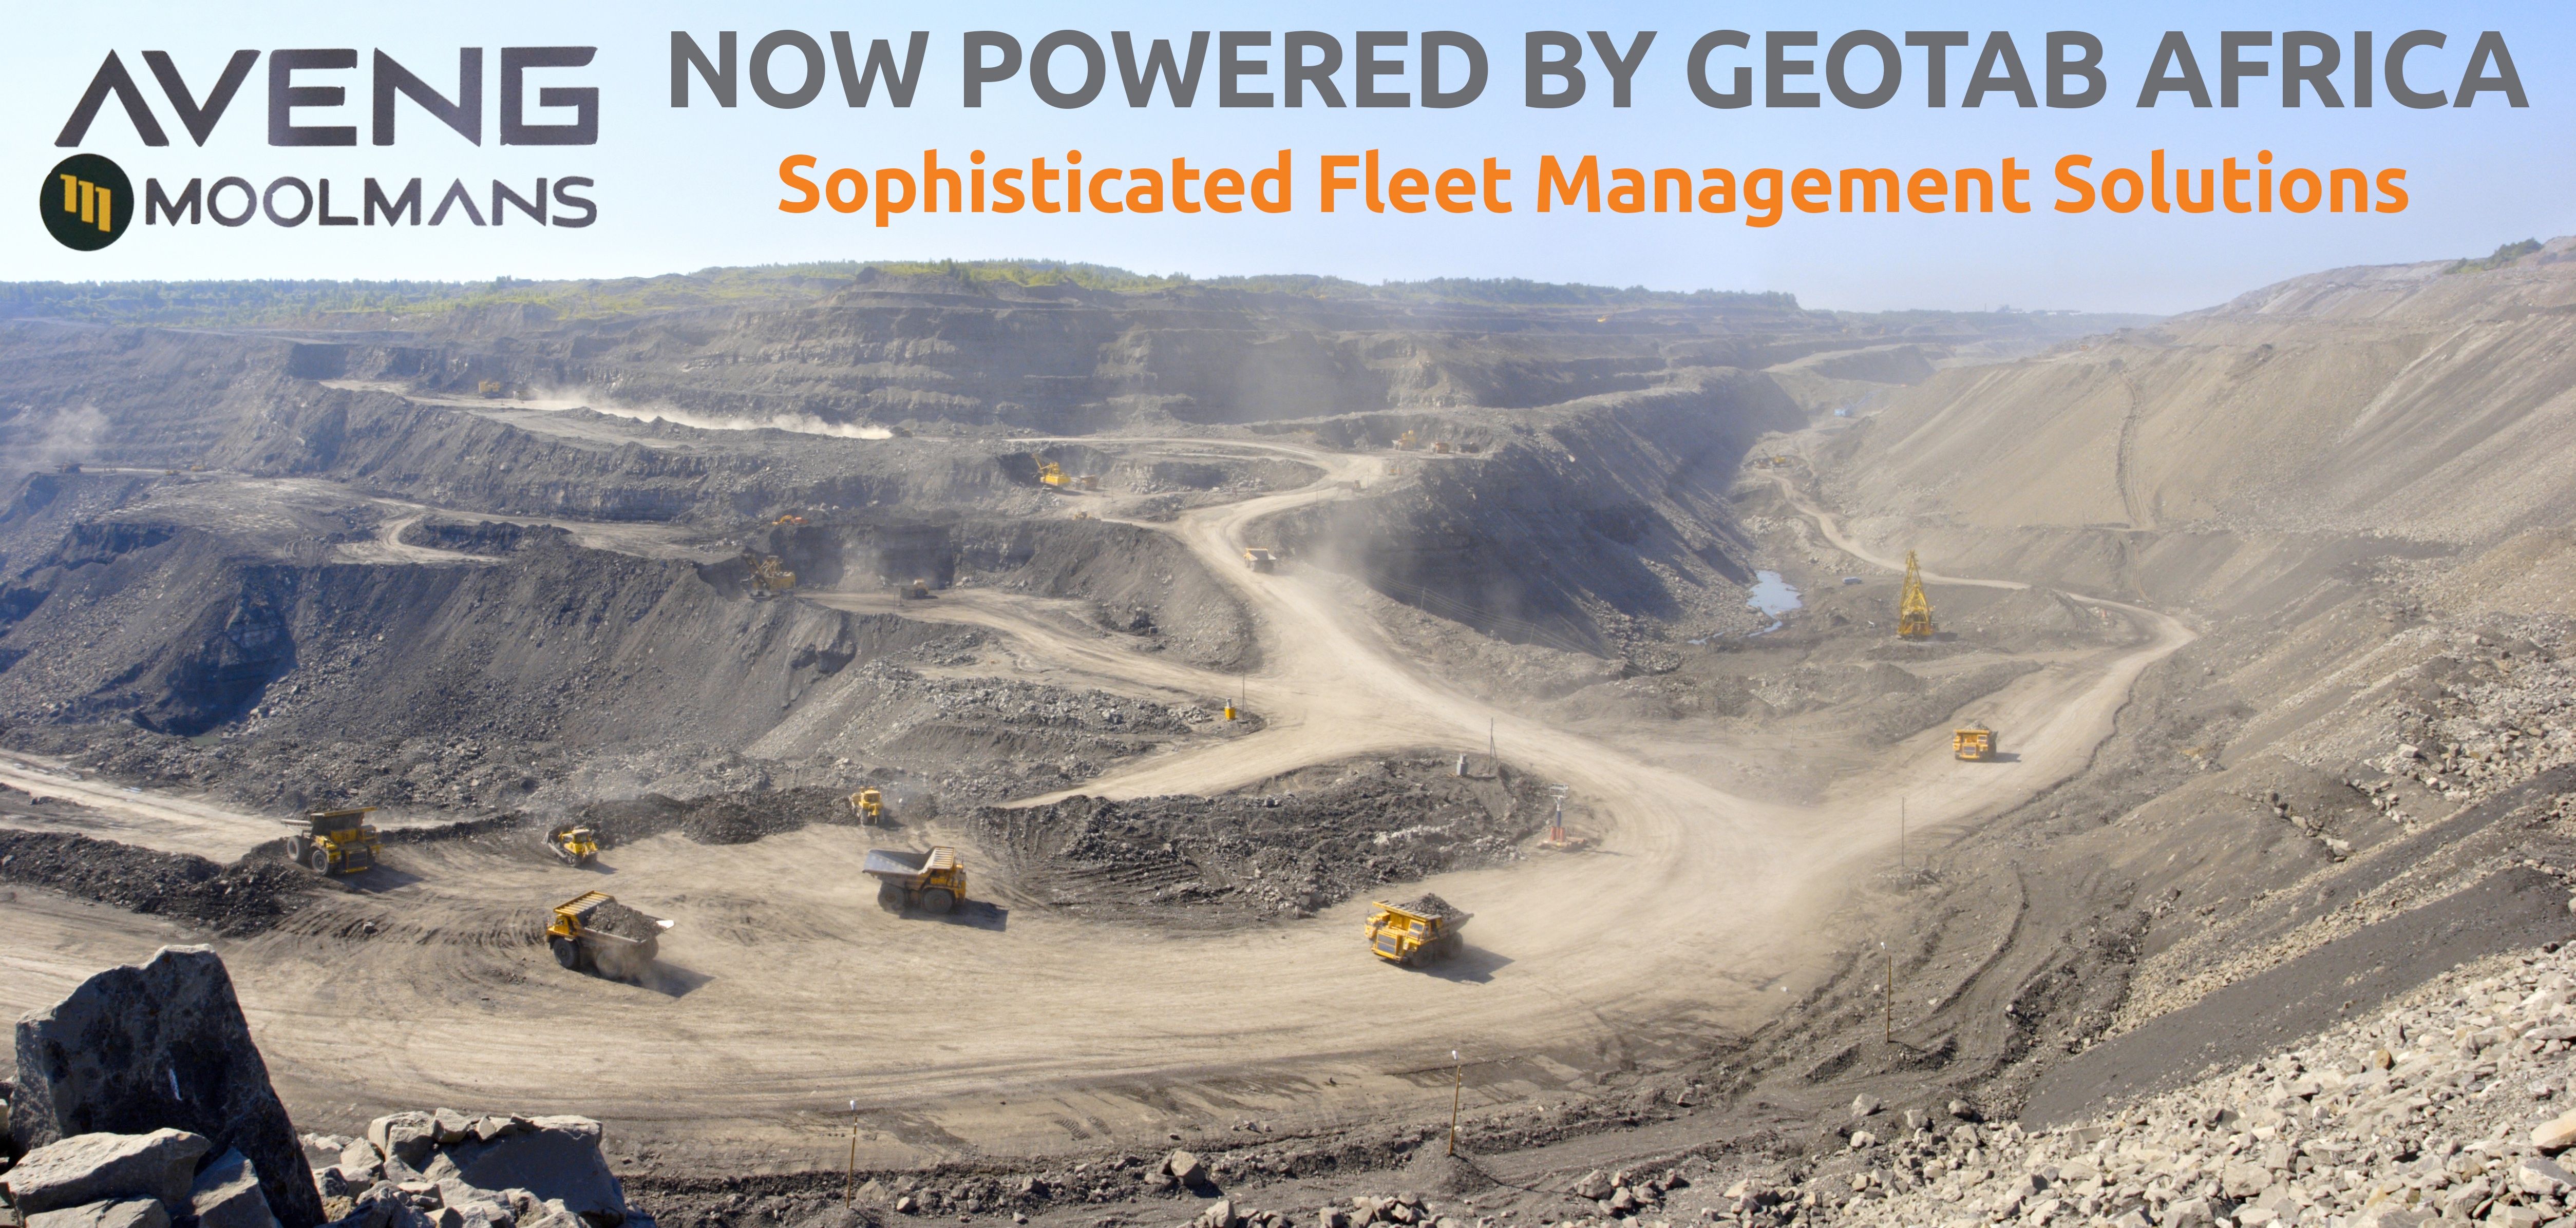 AVENG Moolmans - Now Powered by GEOTAB Africa, Sophisticated Fleet Management Solutions